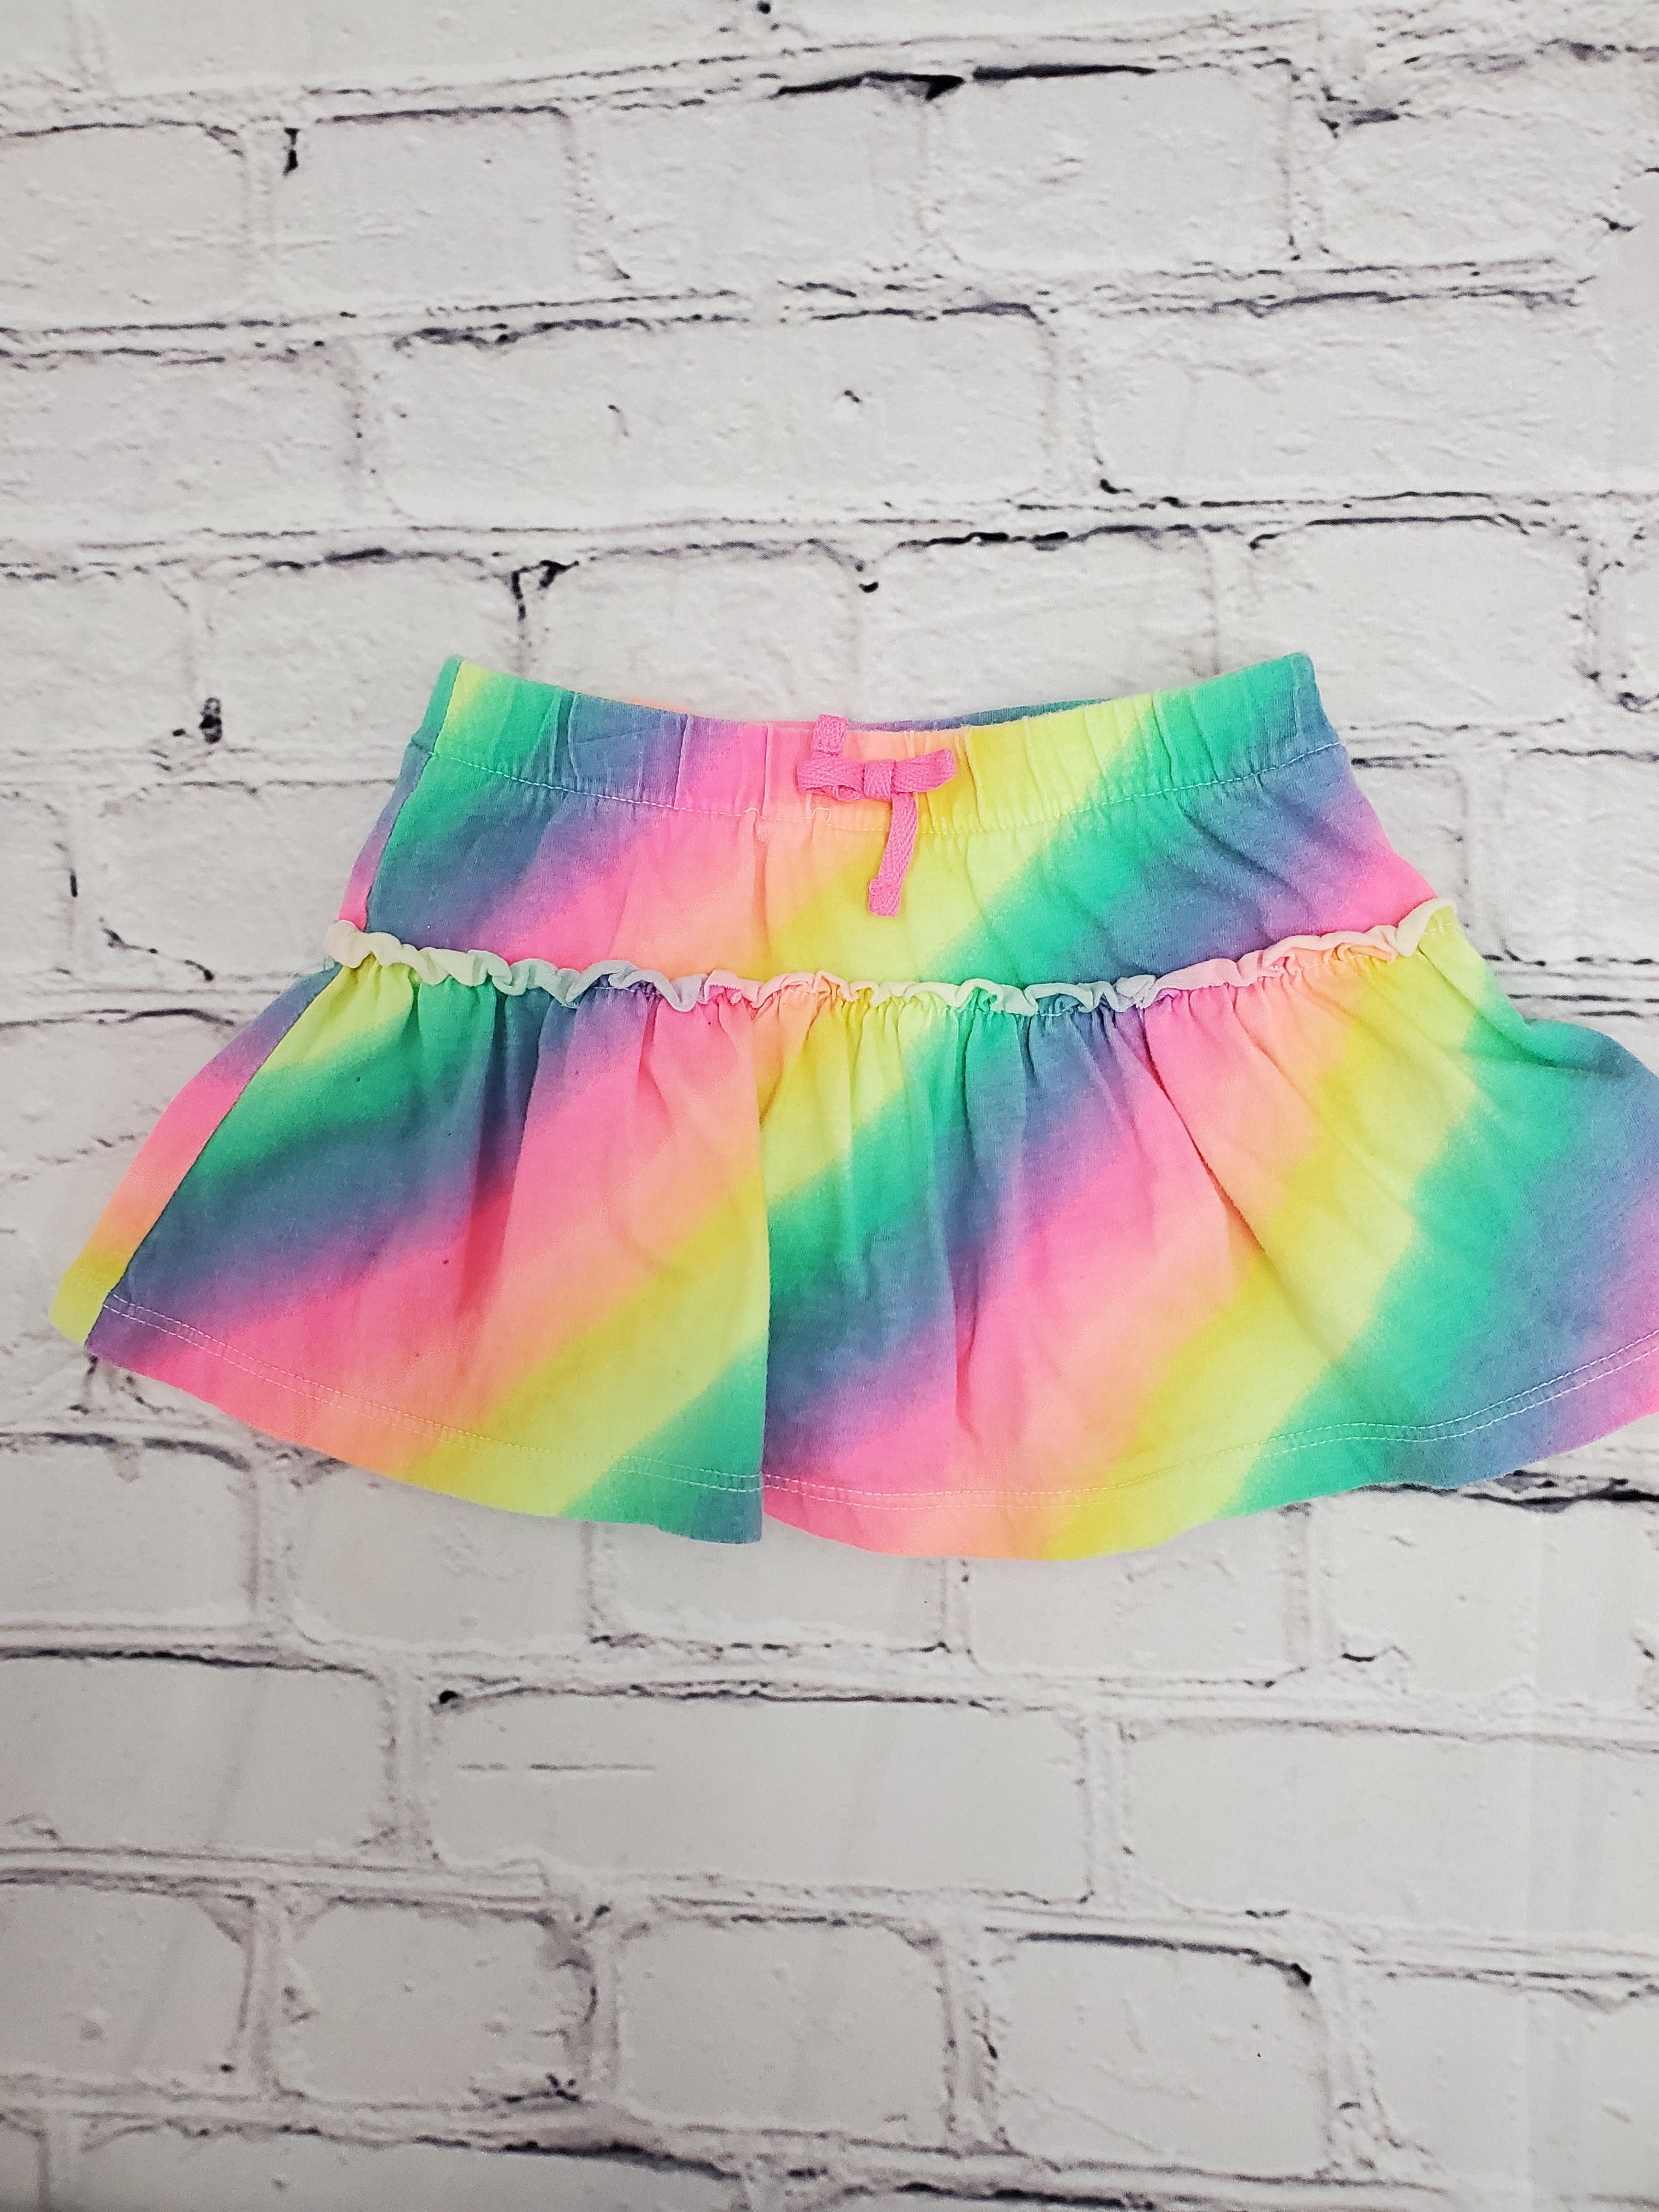 Jumping Bean tie dyed skirt/bloomers sz 24m